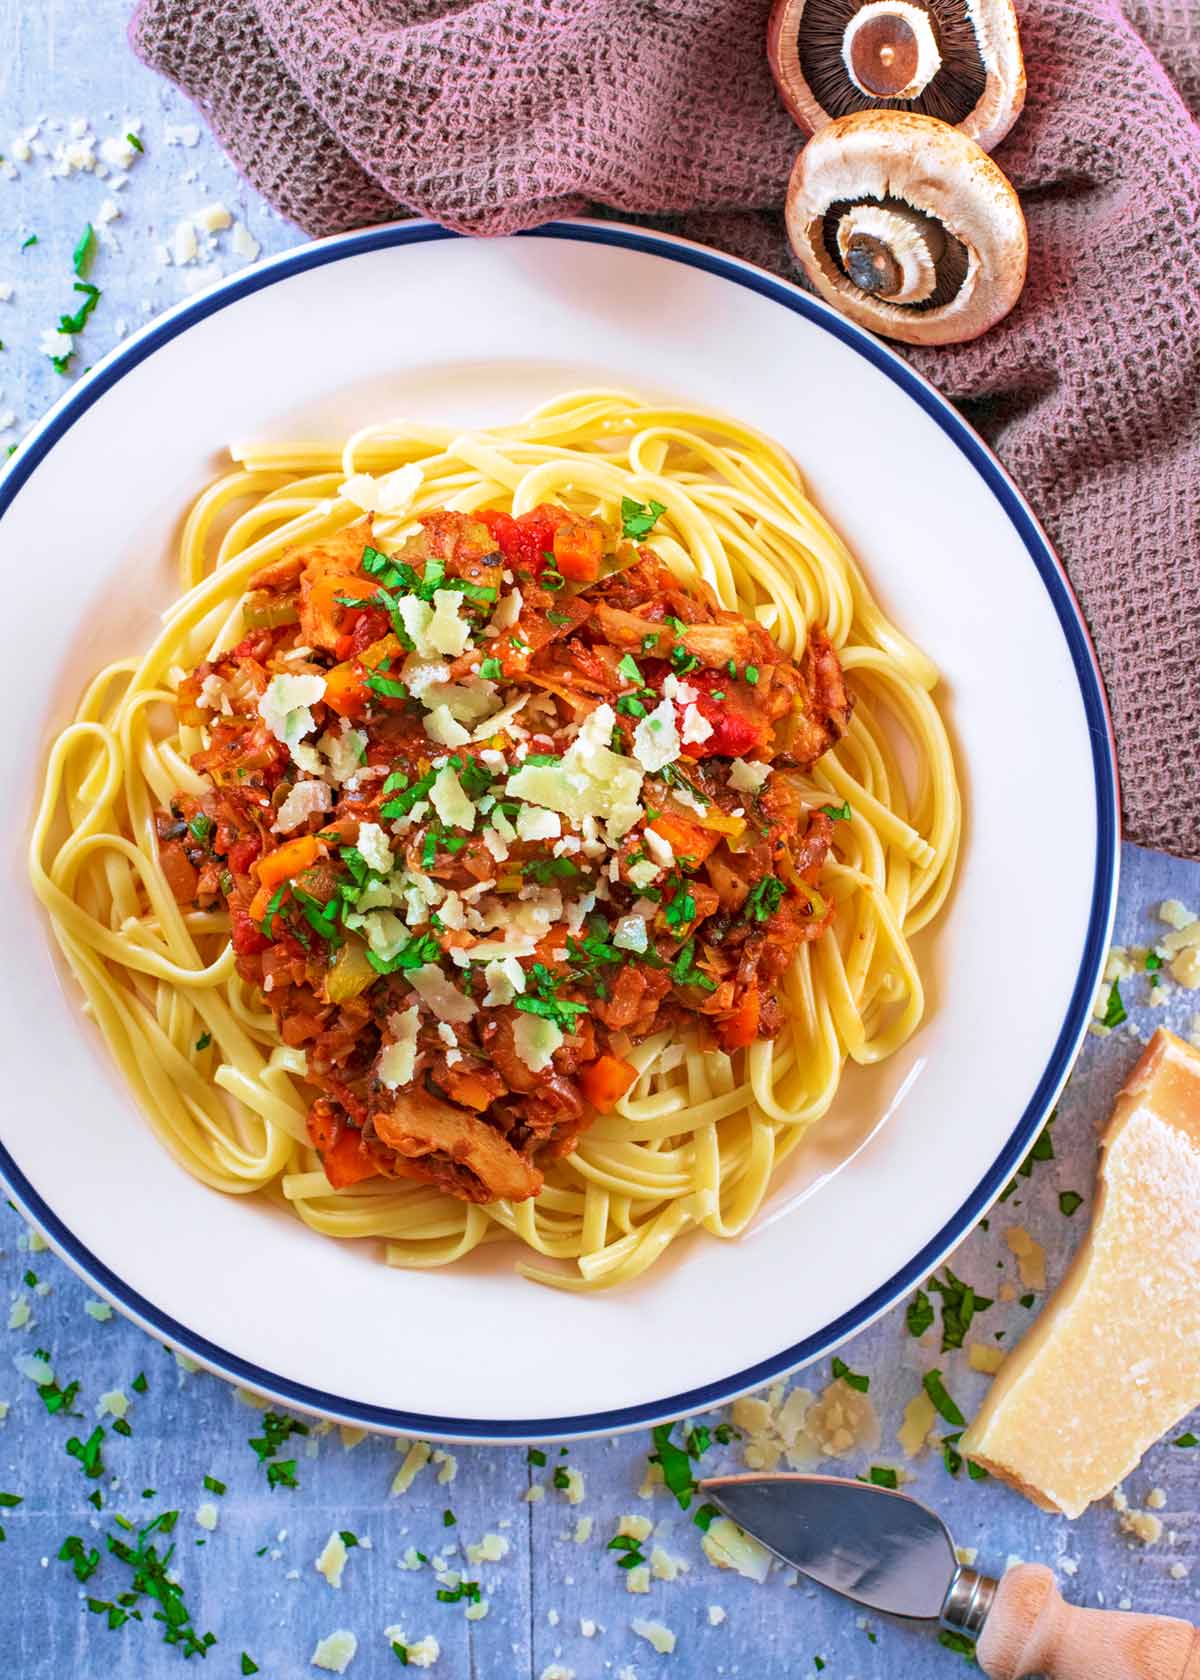 Bolognese and spaghetti on a white plate with a block of parmesan cheese next to it.